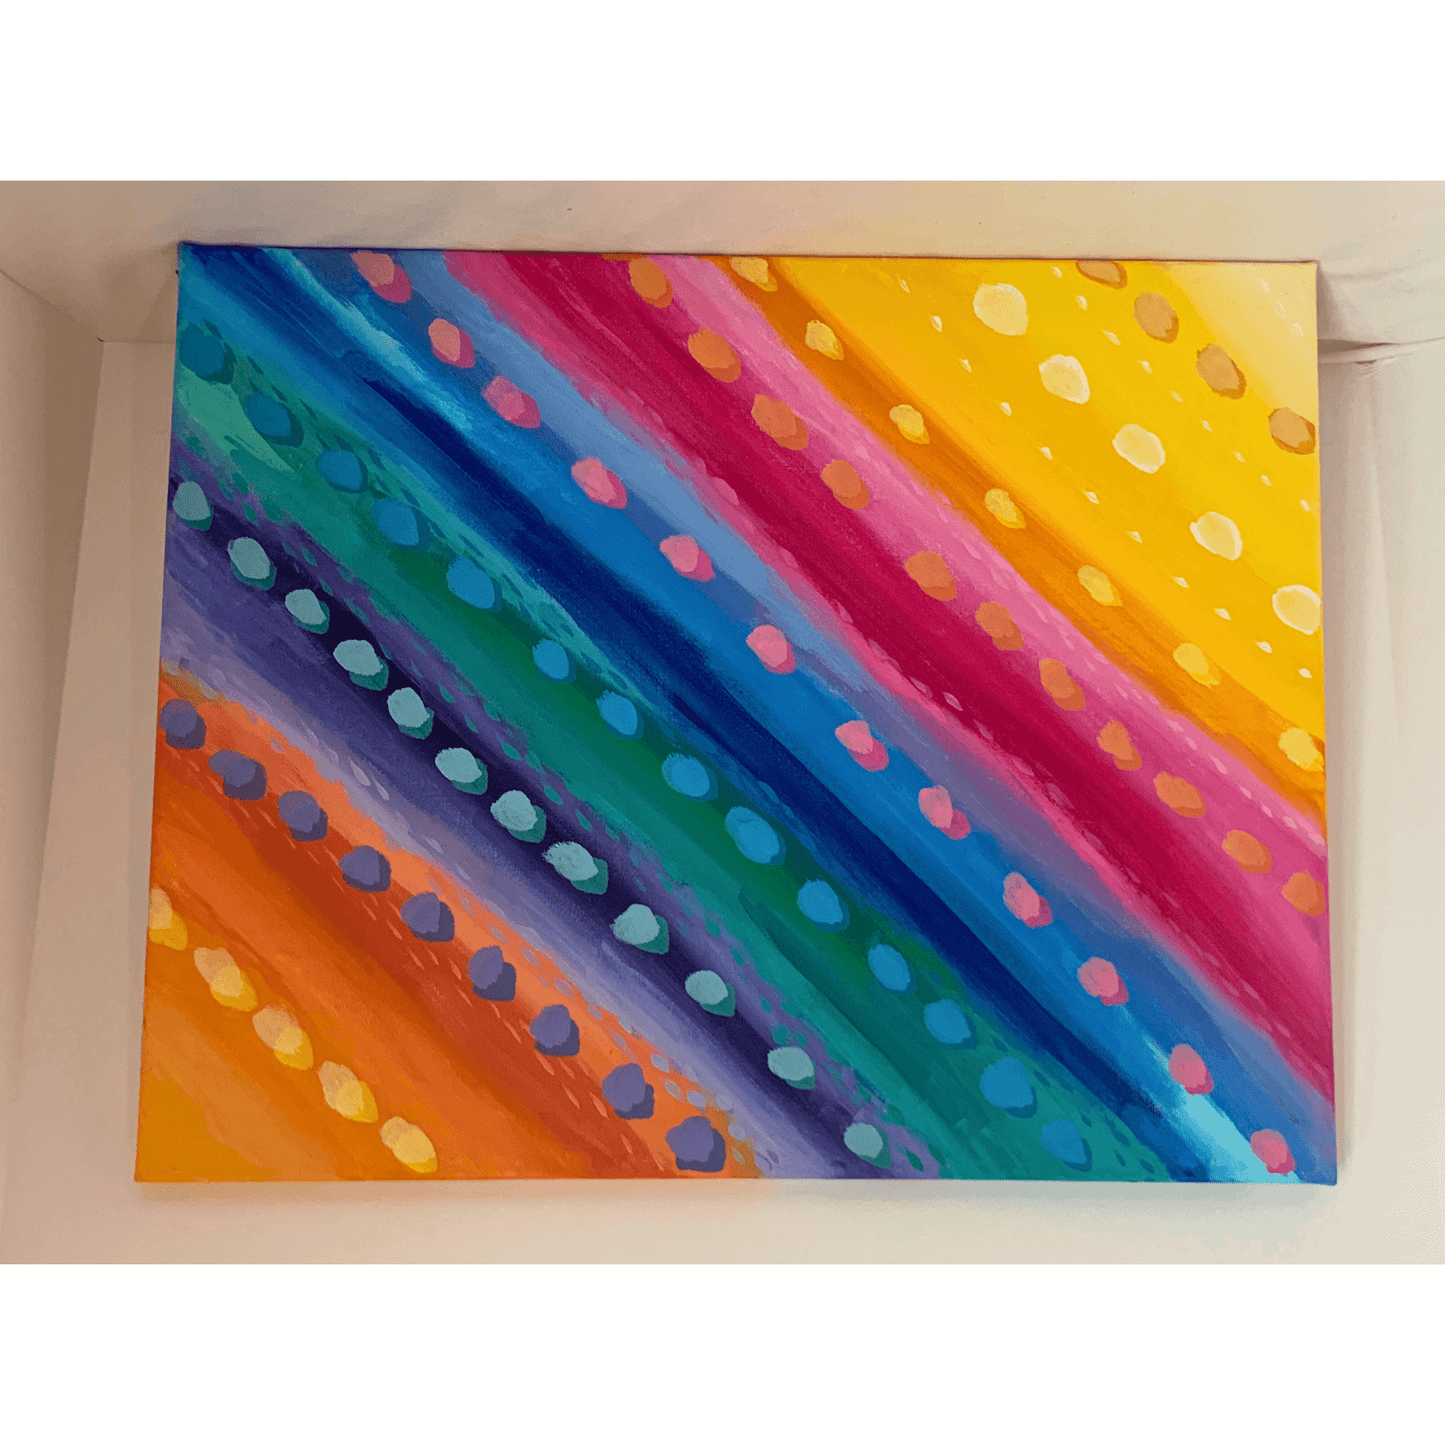 "MAKE YOUR MARK" Colorful Abstract Acrylic Painting on 16x20 inch Canvas